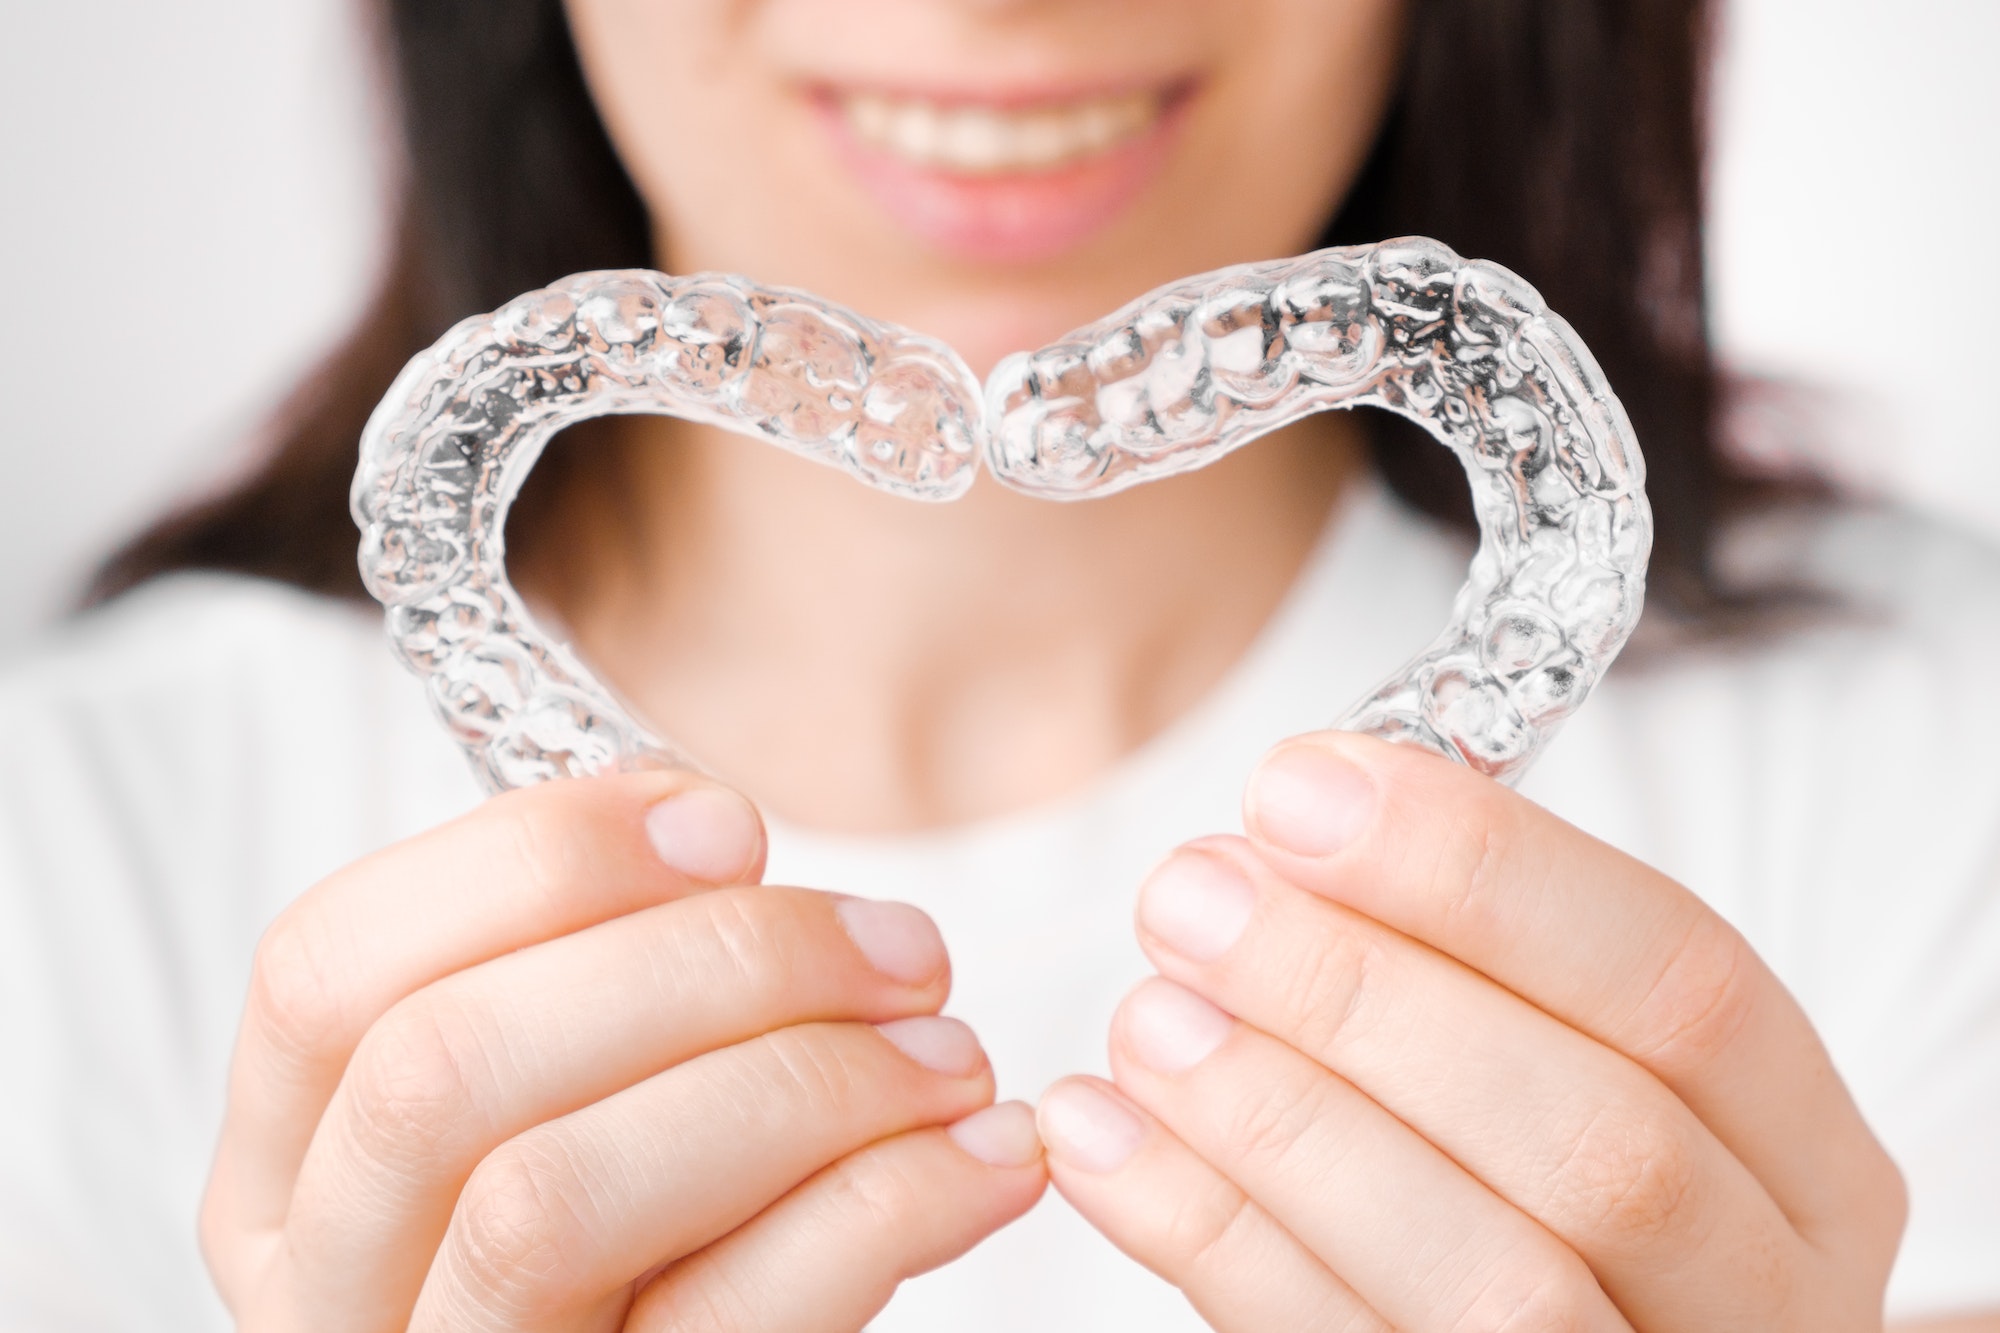 Making heart from aligners or removable braces